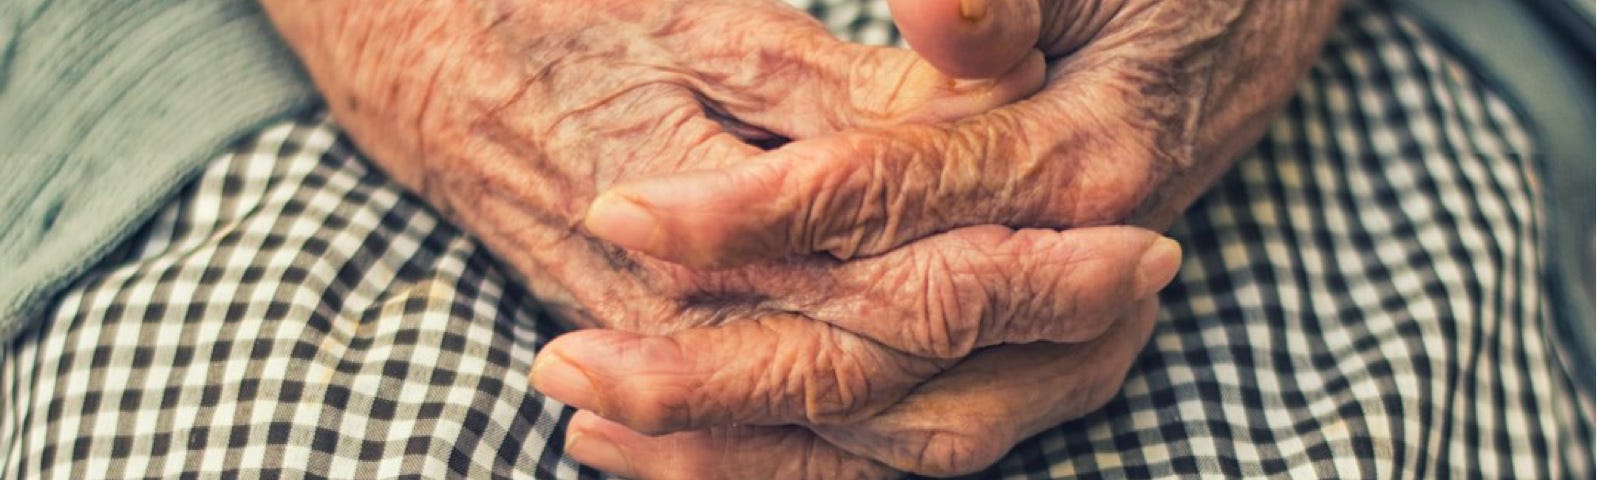 Wrinkled hands, folded, on a plaid skirt, of what seems like an elderly woman